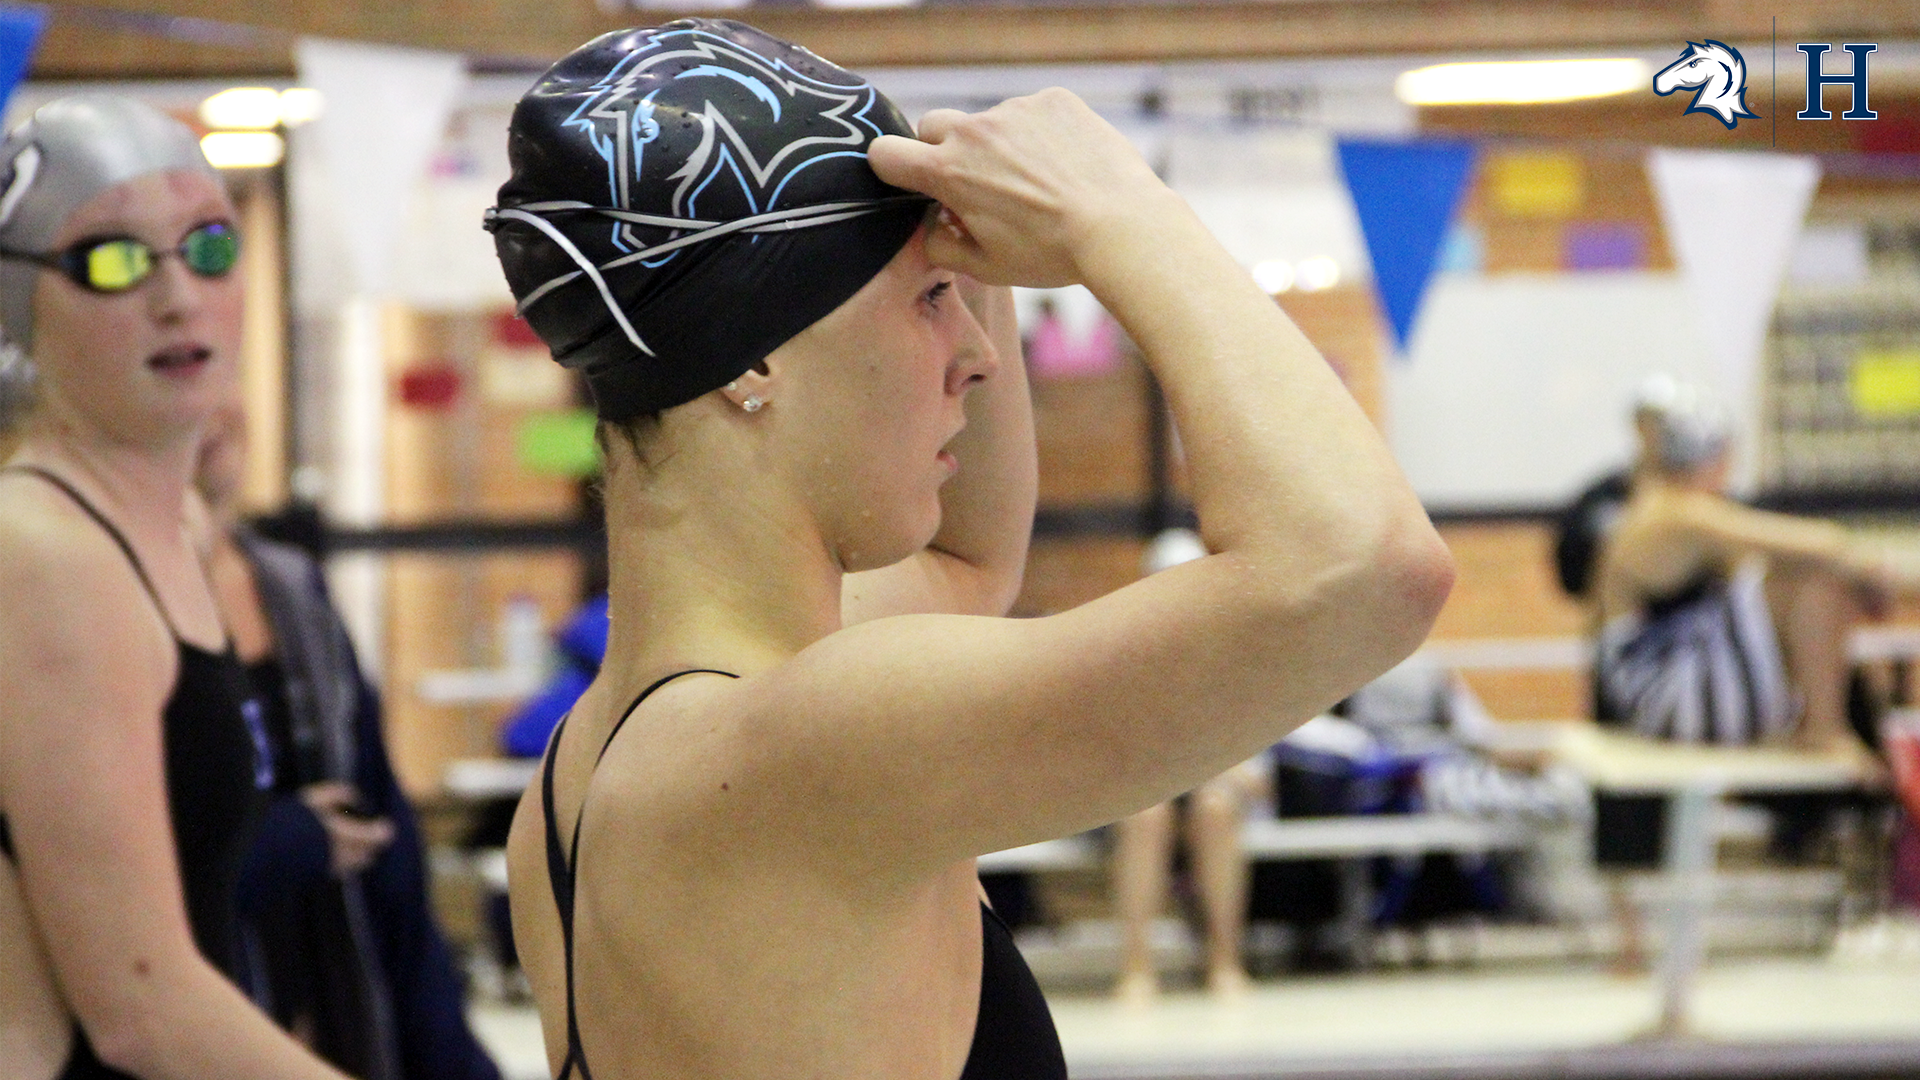 Charger women's swim team improves to 7-0 with 163-117 win at Findlay